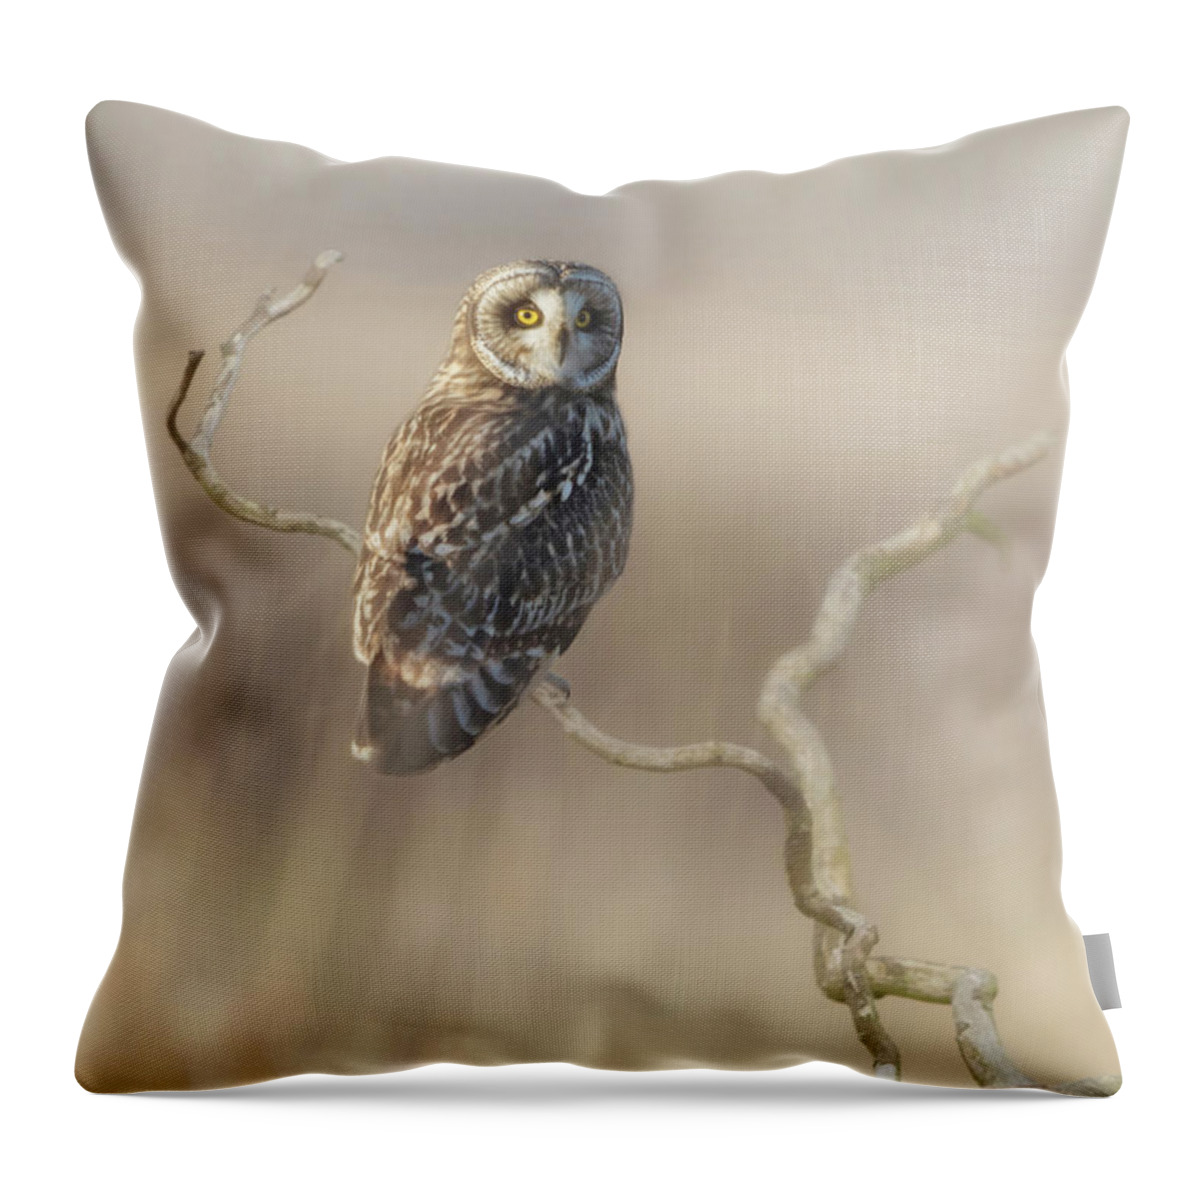 Owl Throw Pillow featuring the photograph Short-eared Owl by Angie Vogel